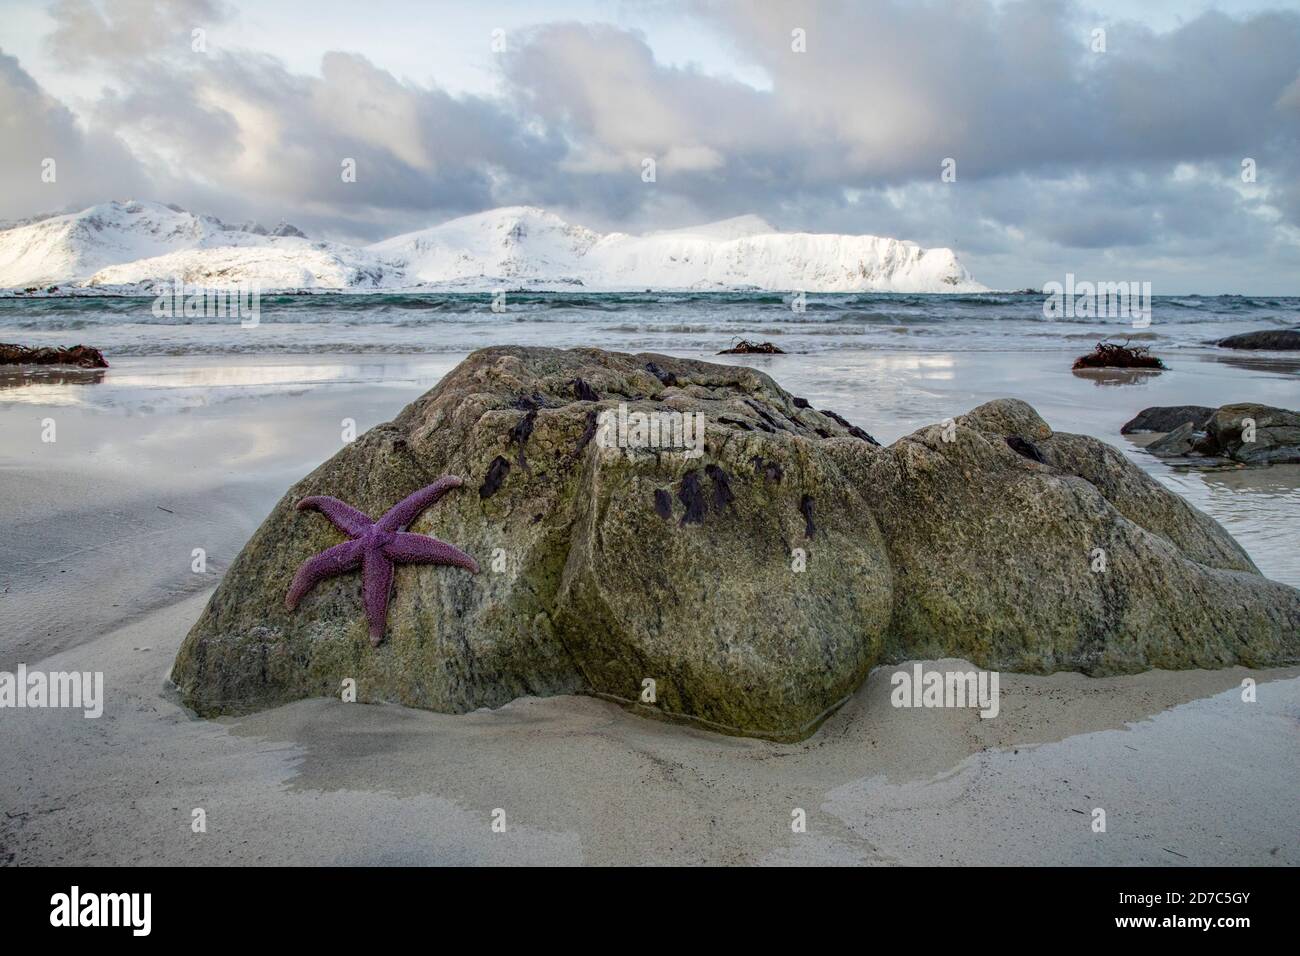 Sea star on the shore in the Lofoten Islands, Norway Stock Photo